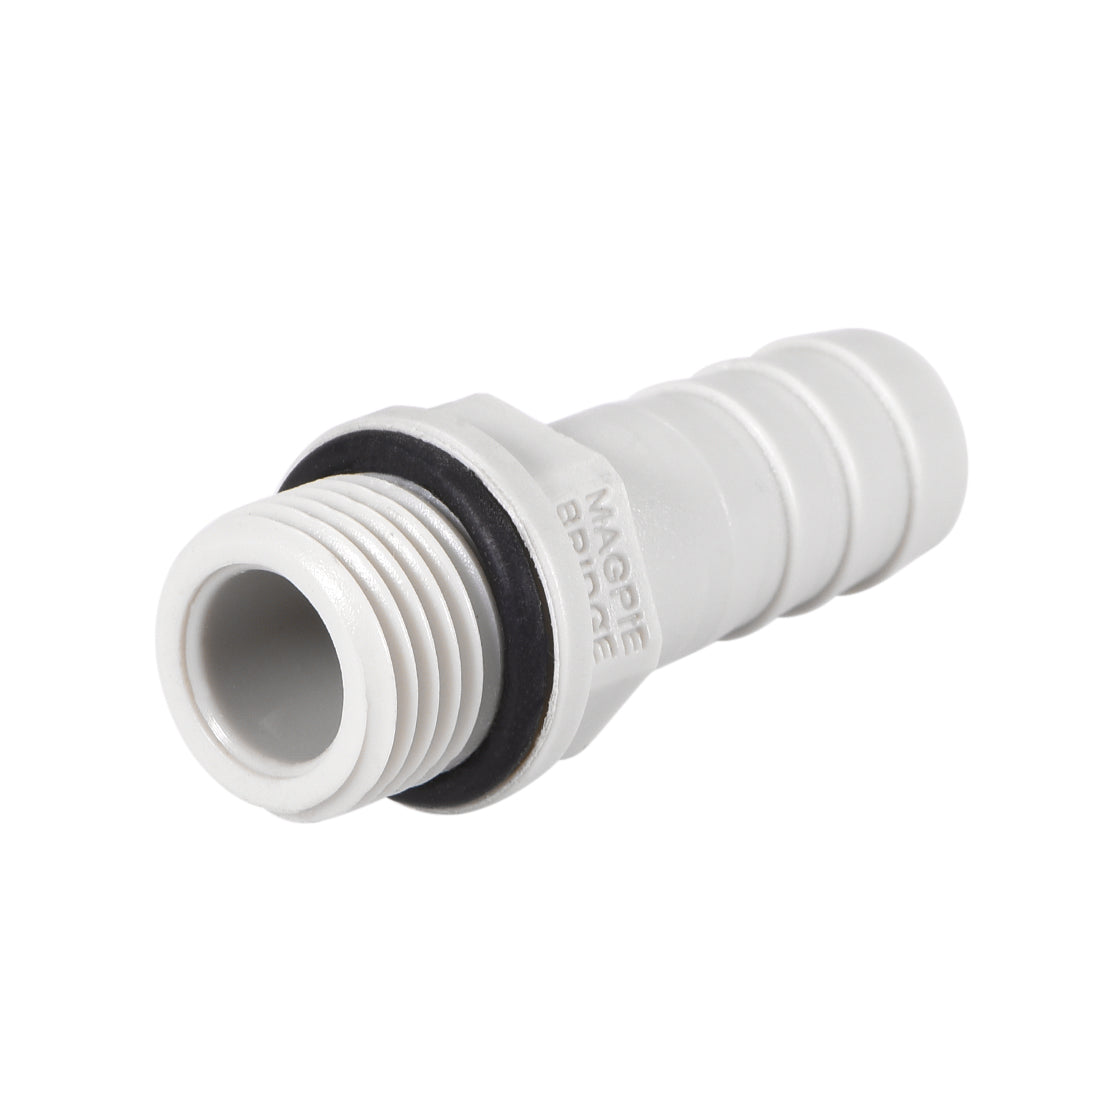 Uxcell Uxcell PVC Barb Hose Fitting Connector Adapter 8mm or 5/16" Barbed x 1/8" G Male Pipe 20pcs